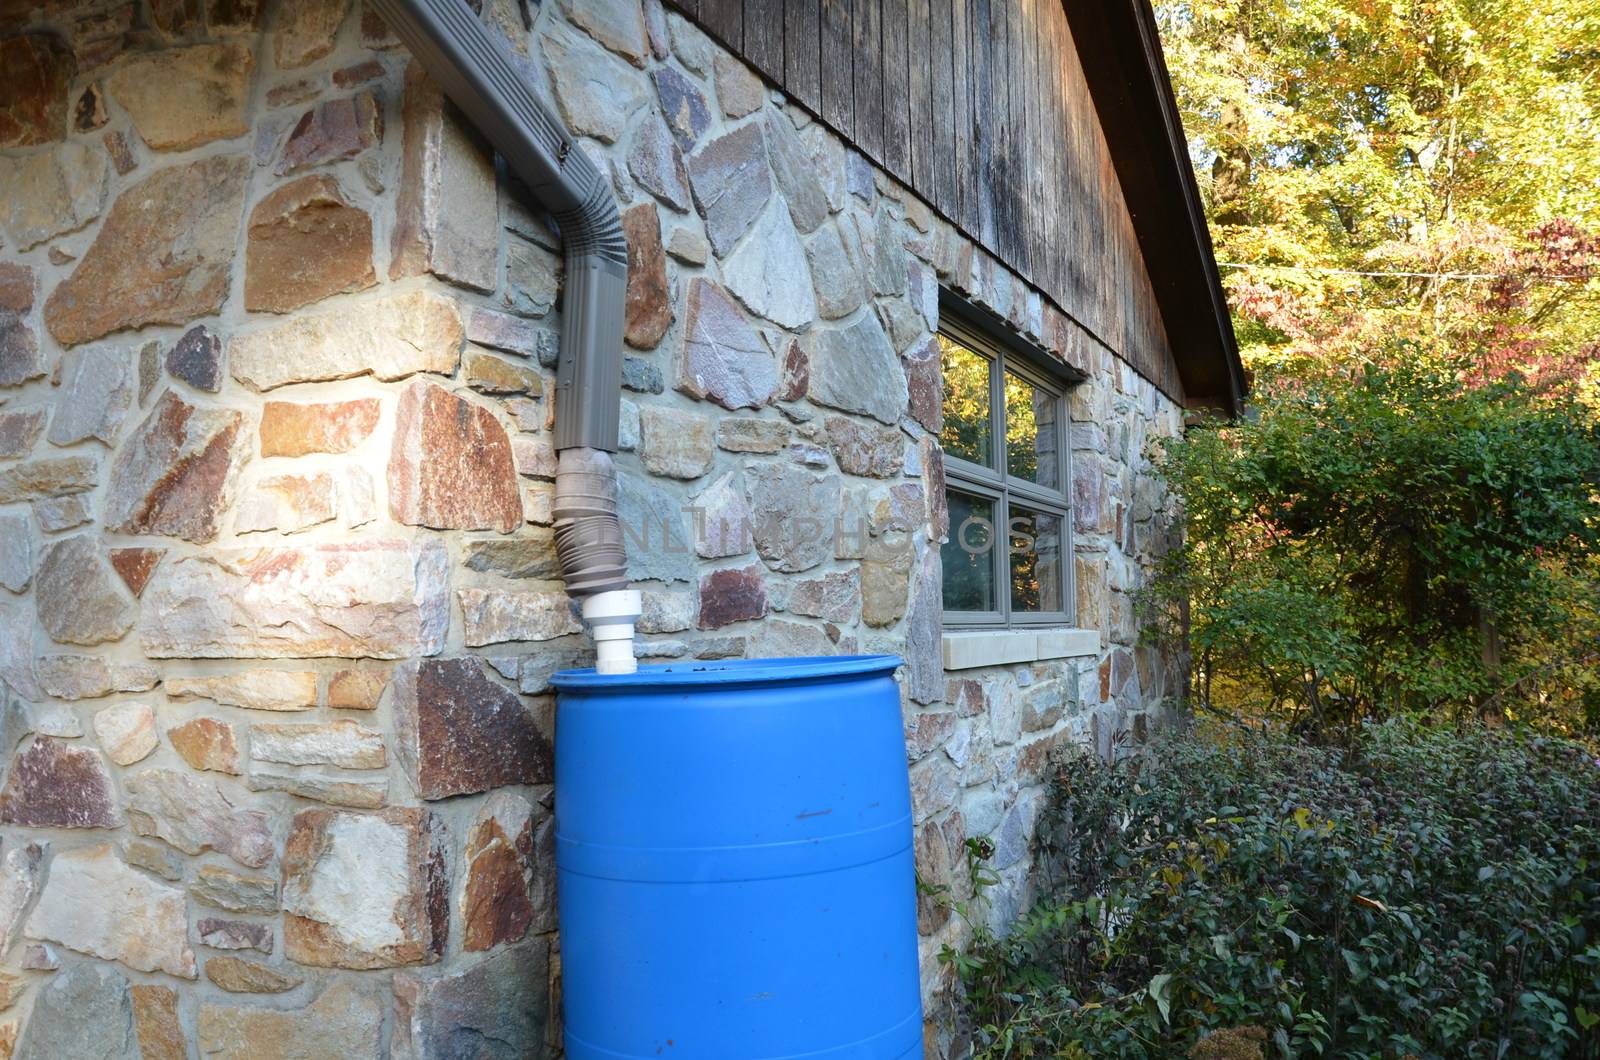 blue rain barrel with gutter downspout and stone building or house